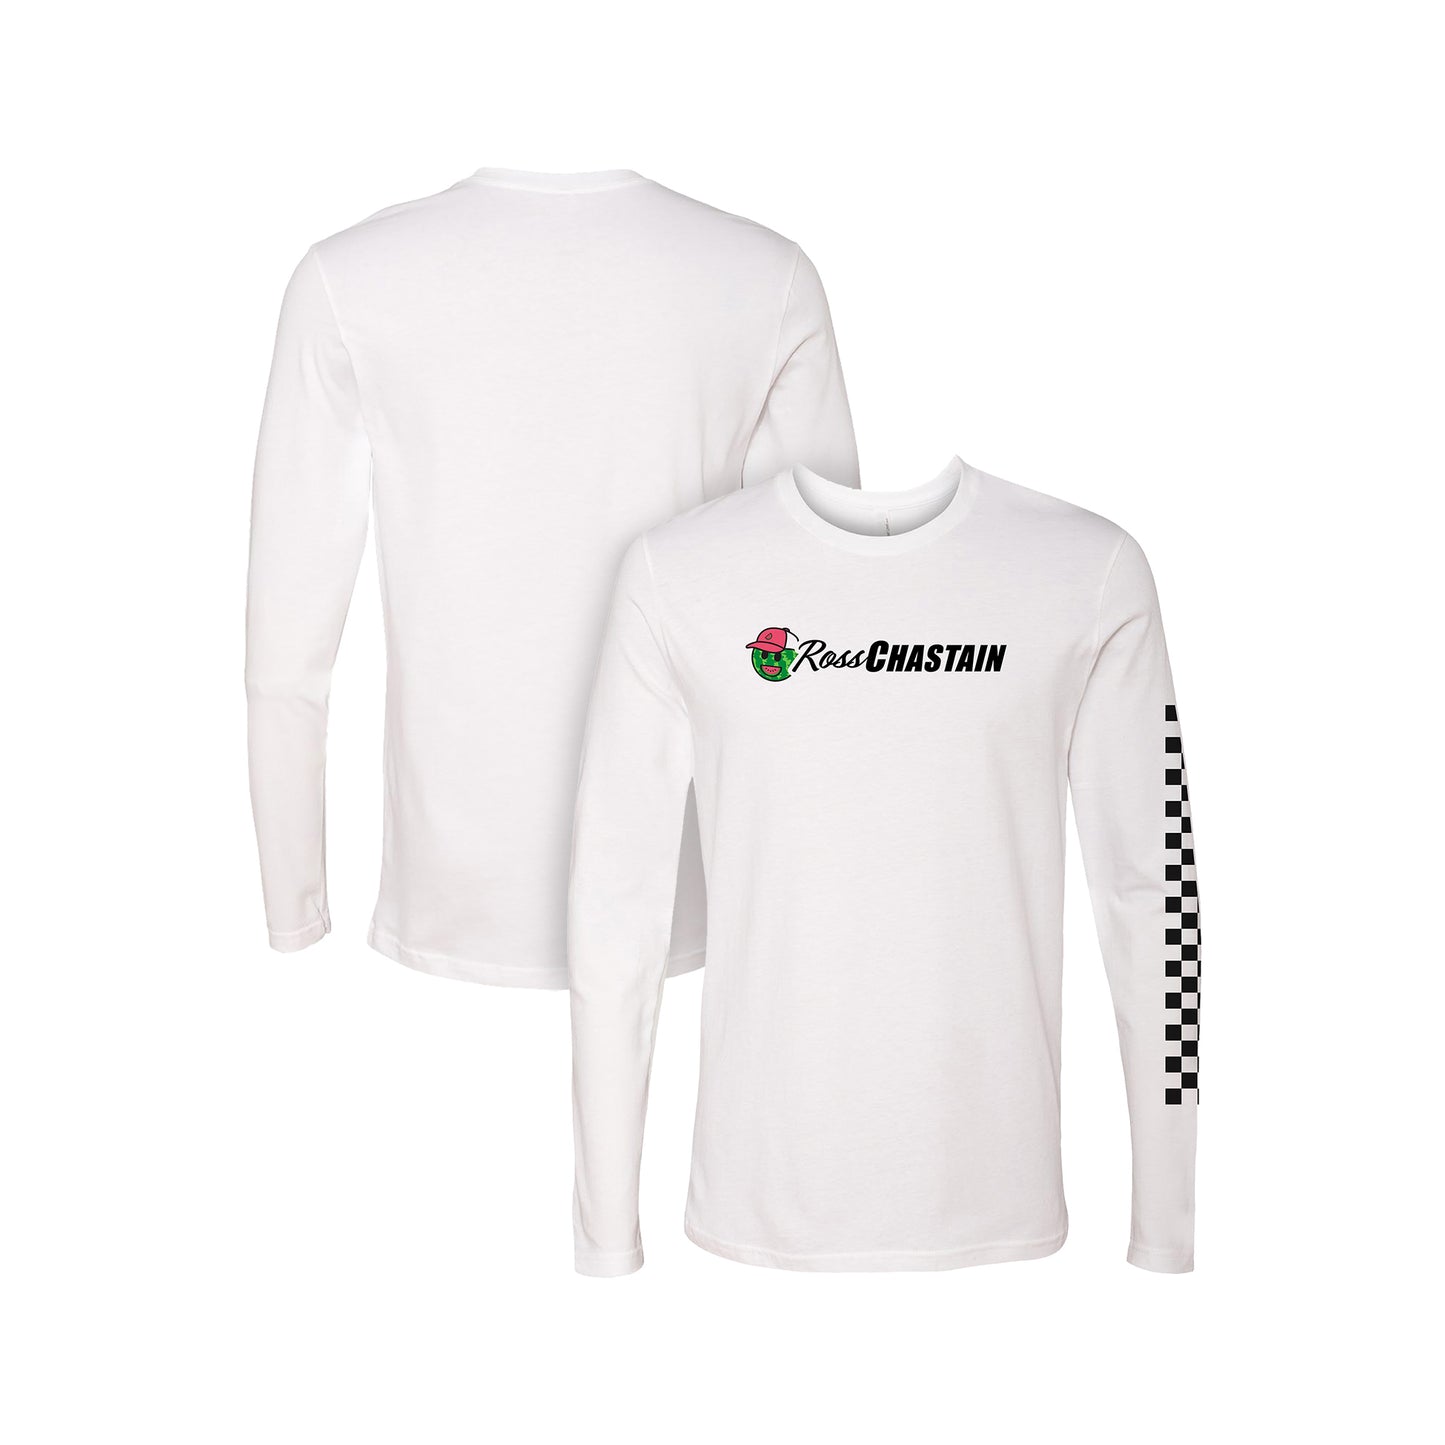 Ross Chastain Long Sleeve Tee by CFS